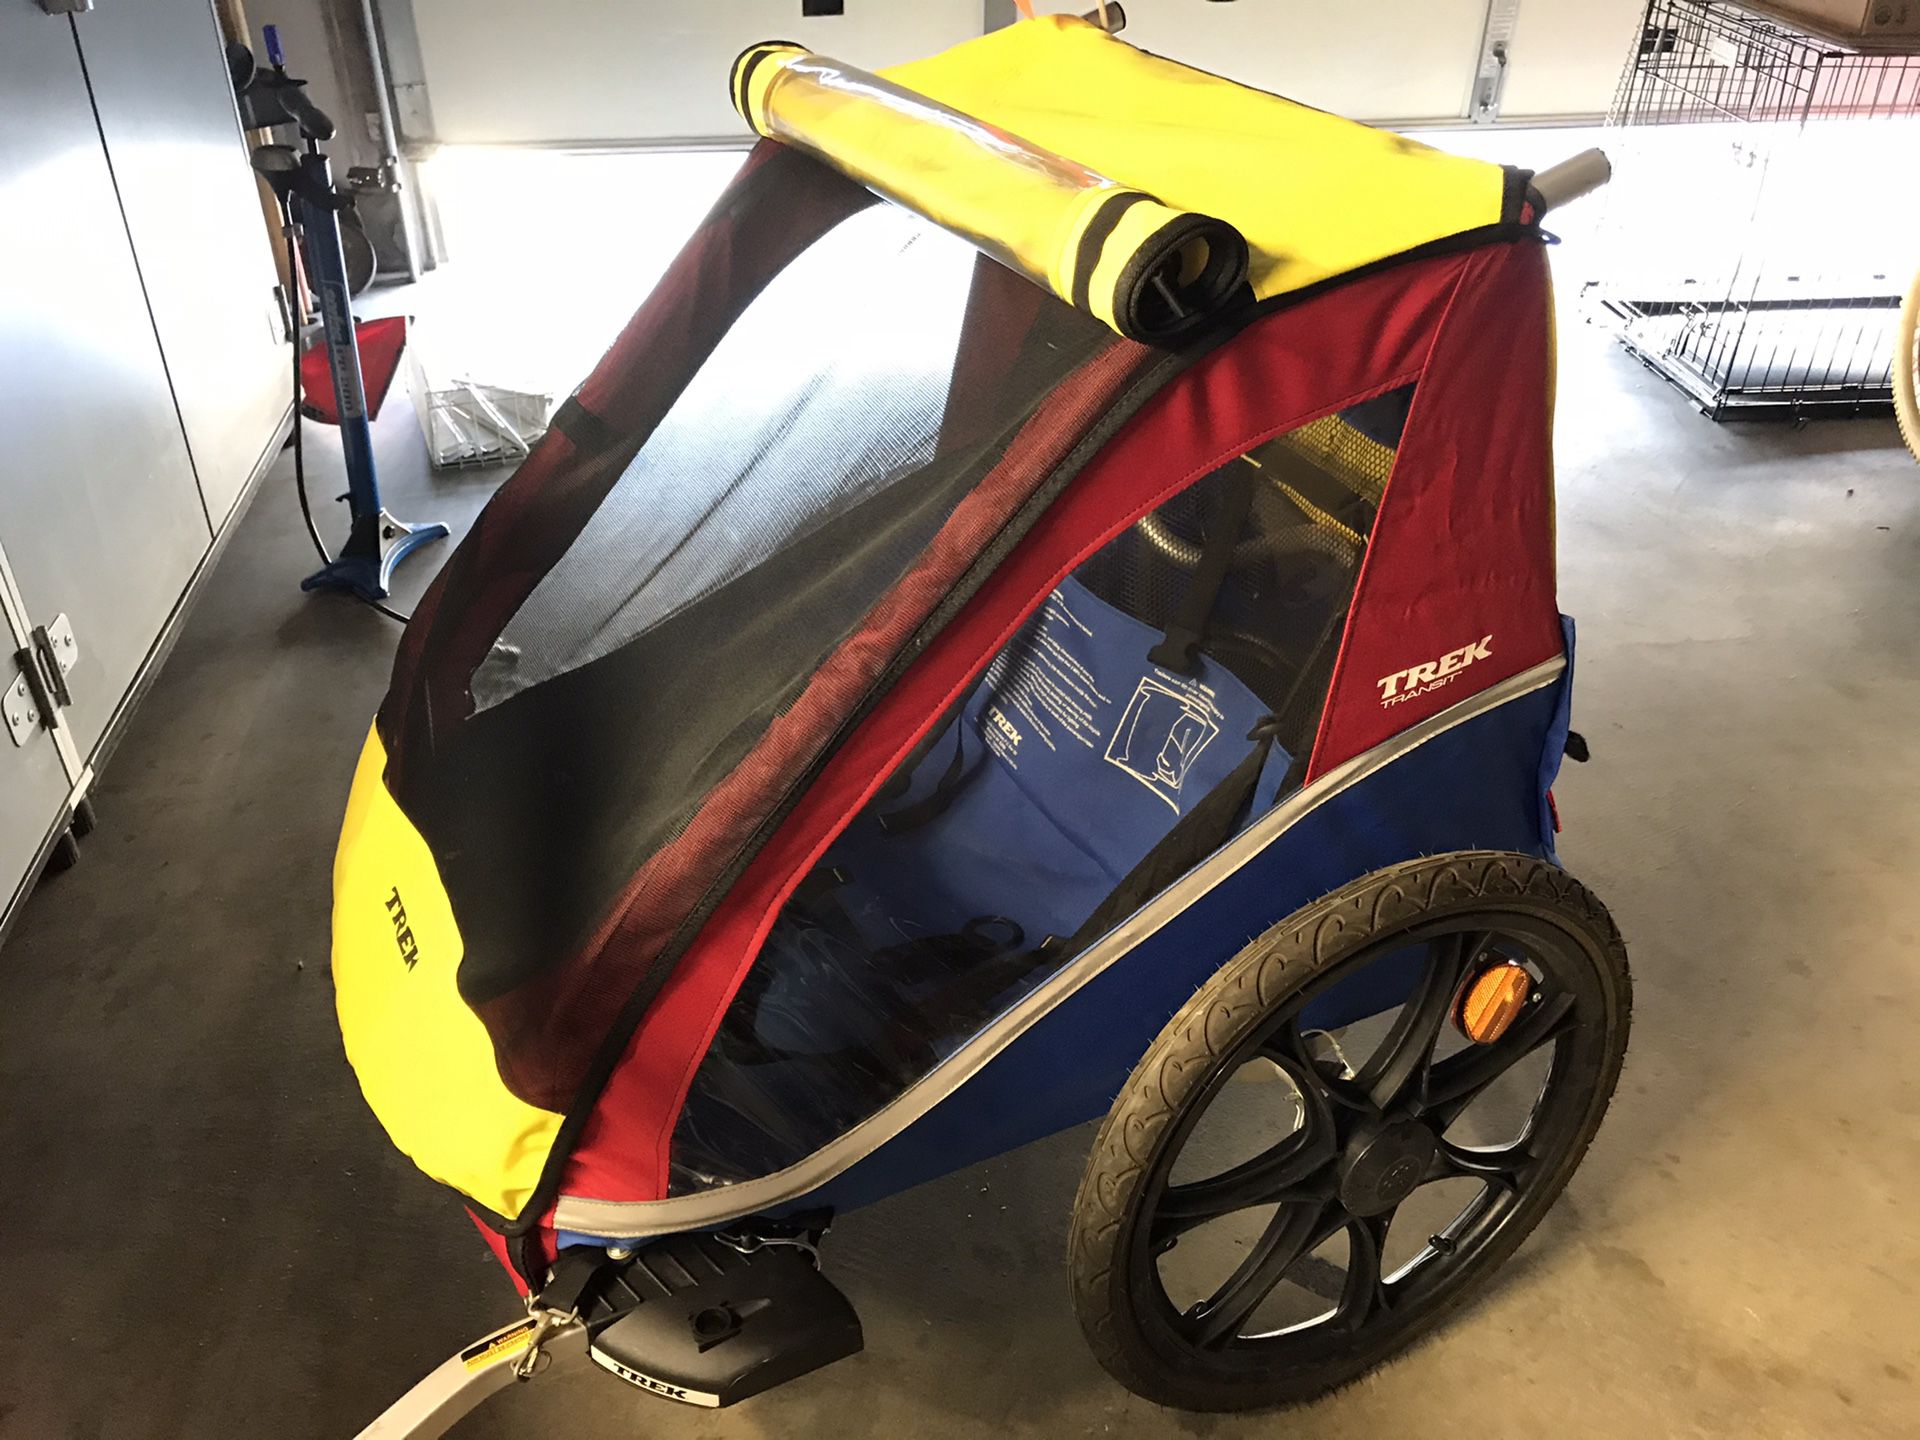 Trek Transit Trailer - hooks to the back of any bike. Use it to haul your gear or take the kids for a ride